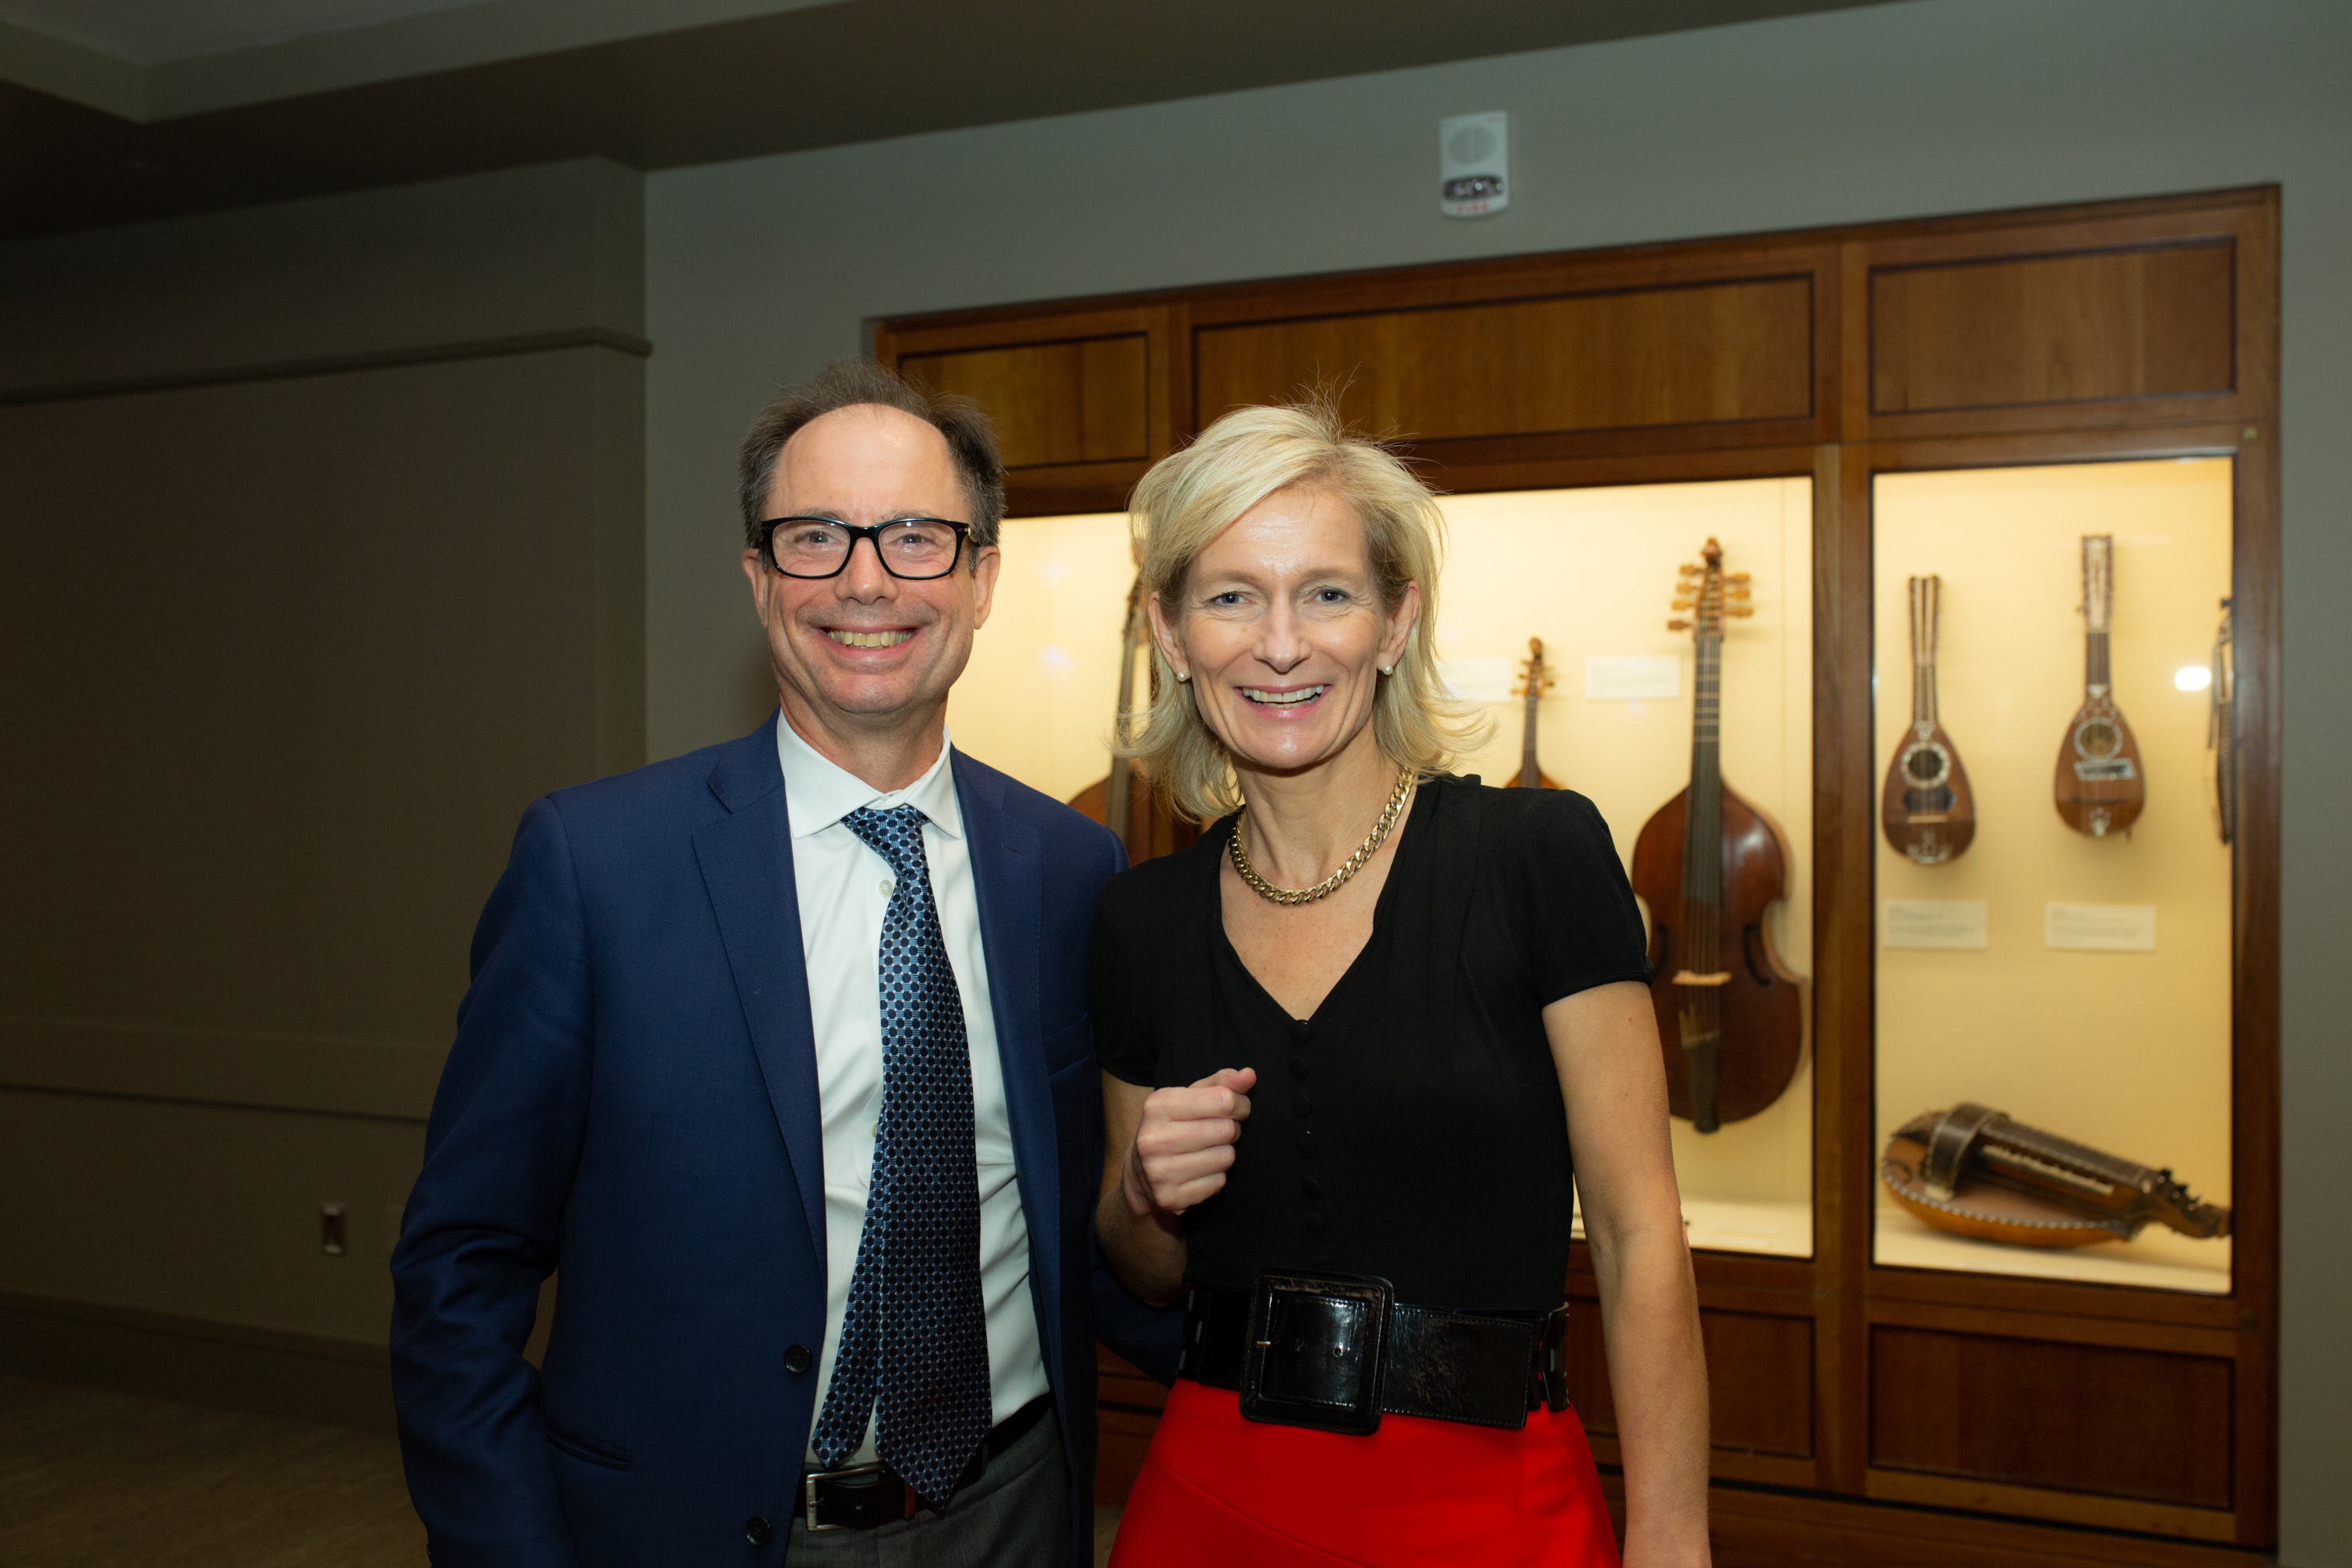 Photo of Hans Strauch and Zanny Minton Beddoes at Symphony Hall